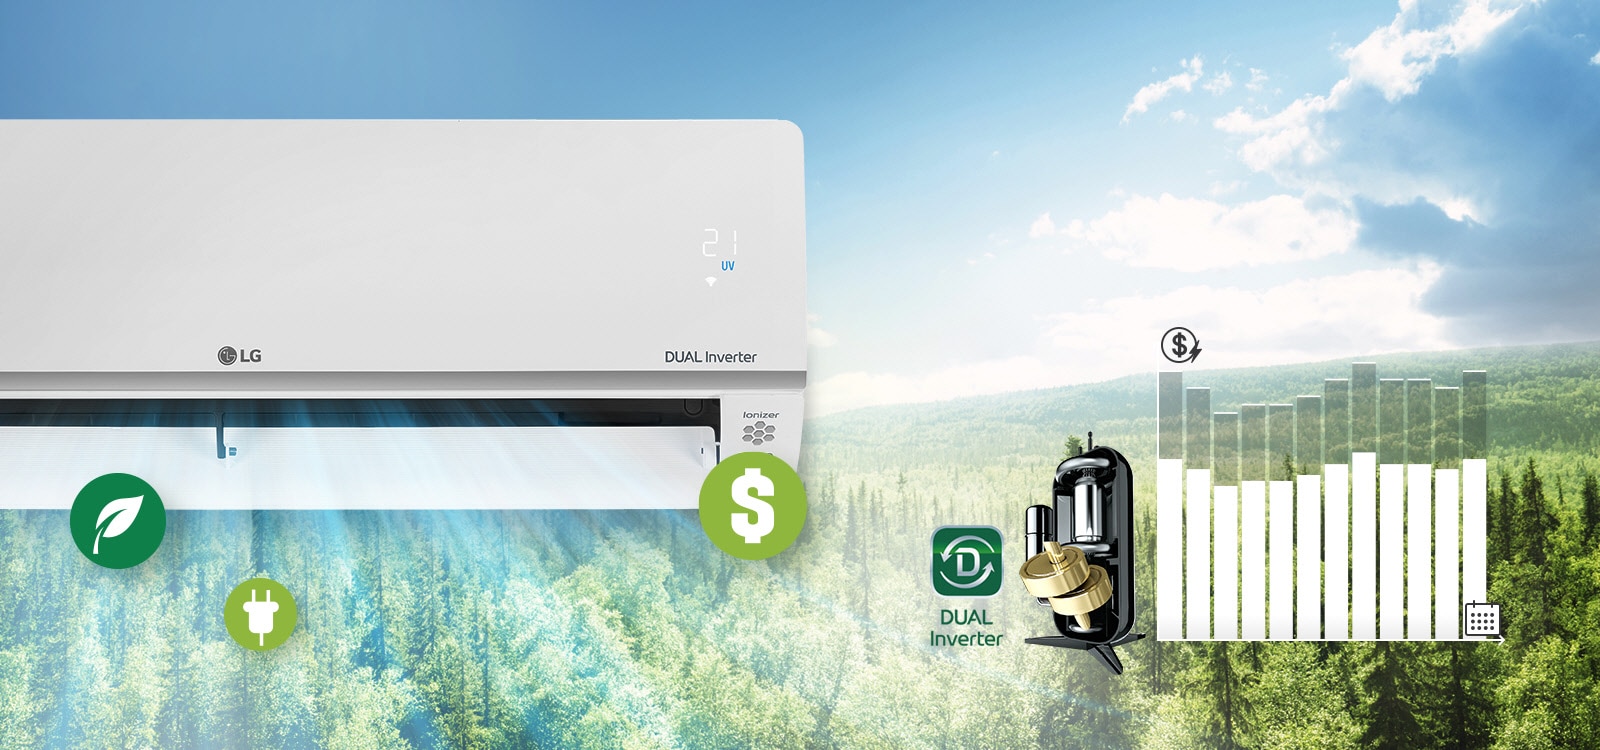 A forest landscape is in the background with half of the LG air conditioner visible on the side. The LG logo and Dual Inverter logo can be seen on the machine with the air quality panel lit up green. In front of the air conditioner in the air blowing out are three icons indicating clean air, money, and energy. To the right of the machine is the Dual Inverter logo and an image of the Dual Dual Inverter. Further to the right is a bar graph. The bars go up indicating more money spent and then go down to show that the dual inverter saves customers money.